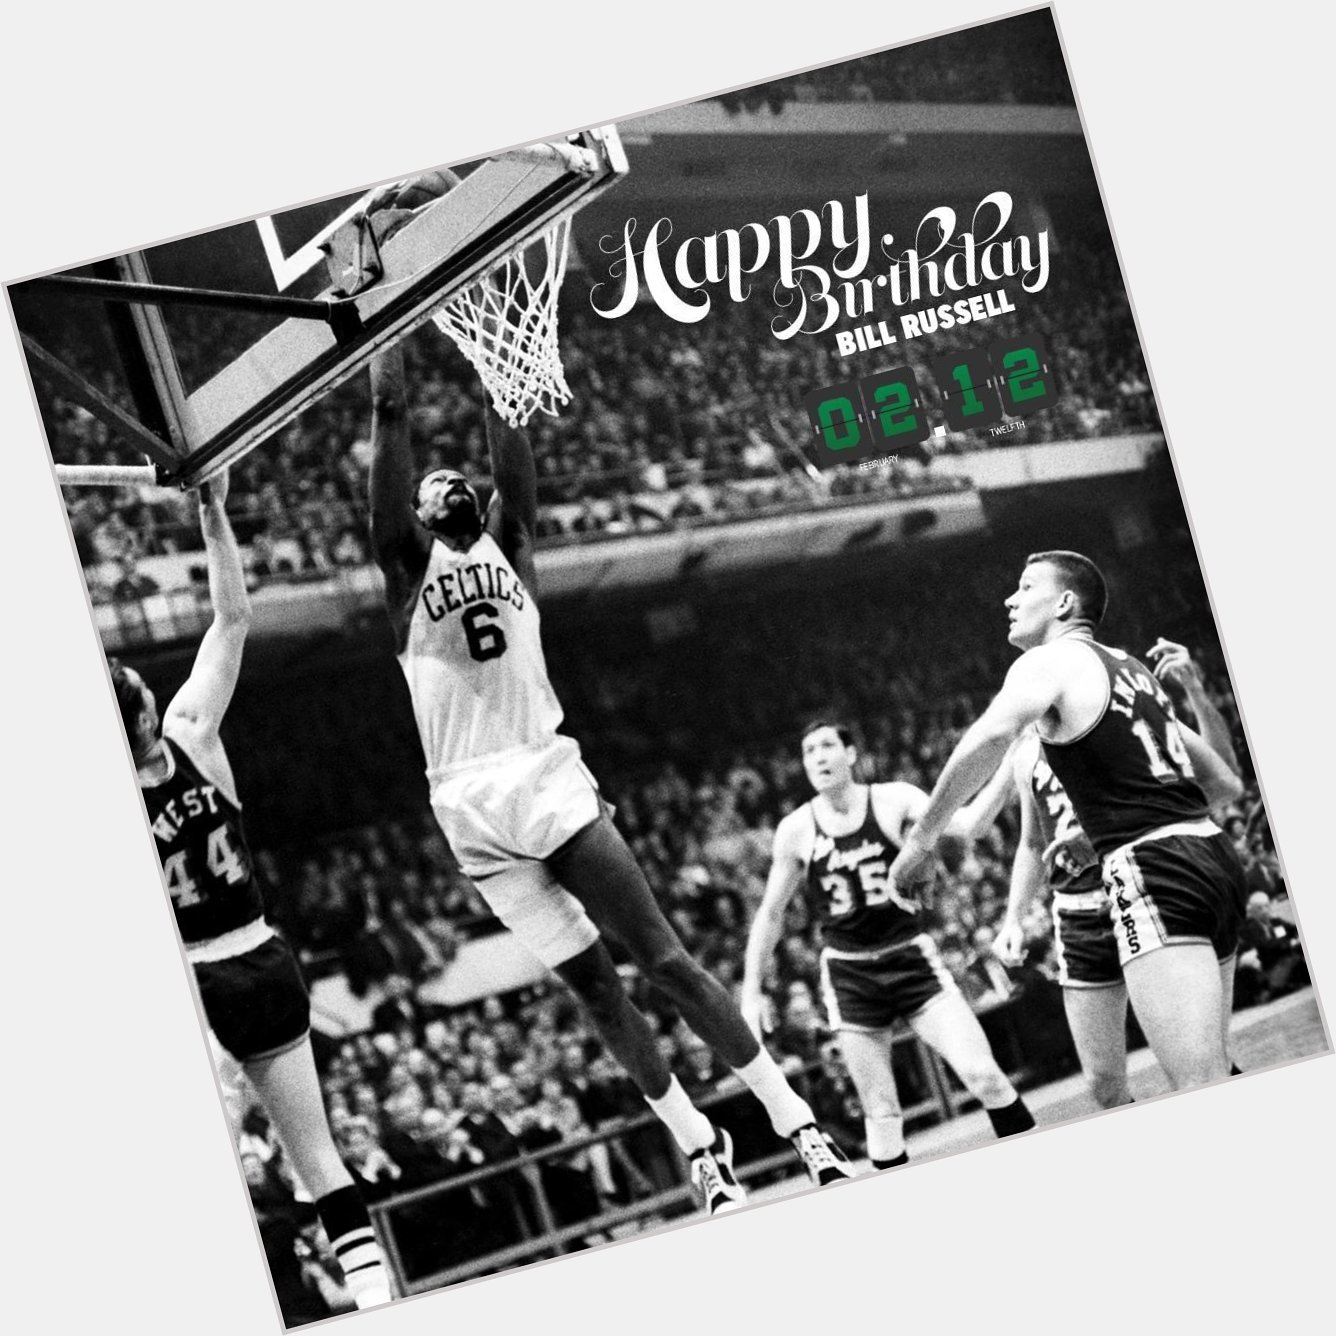 Happy Birthday to the legend Bill Russell! 